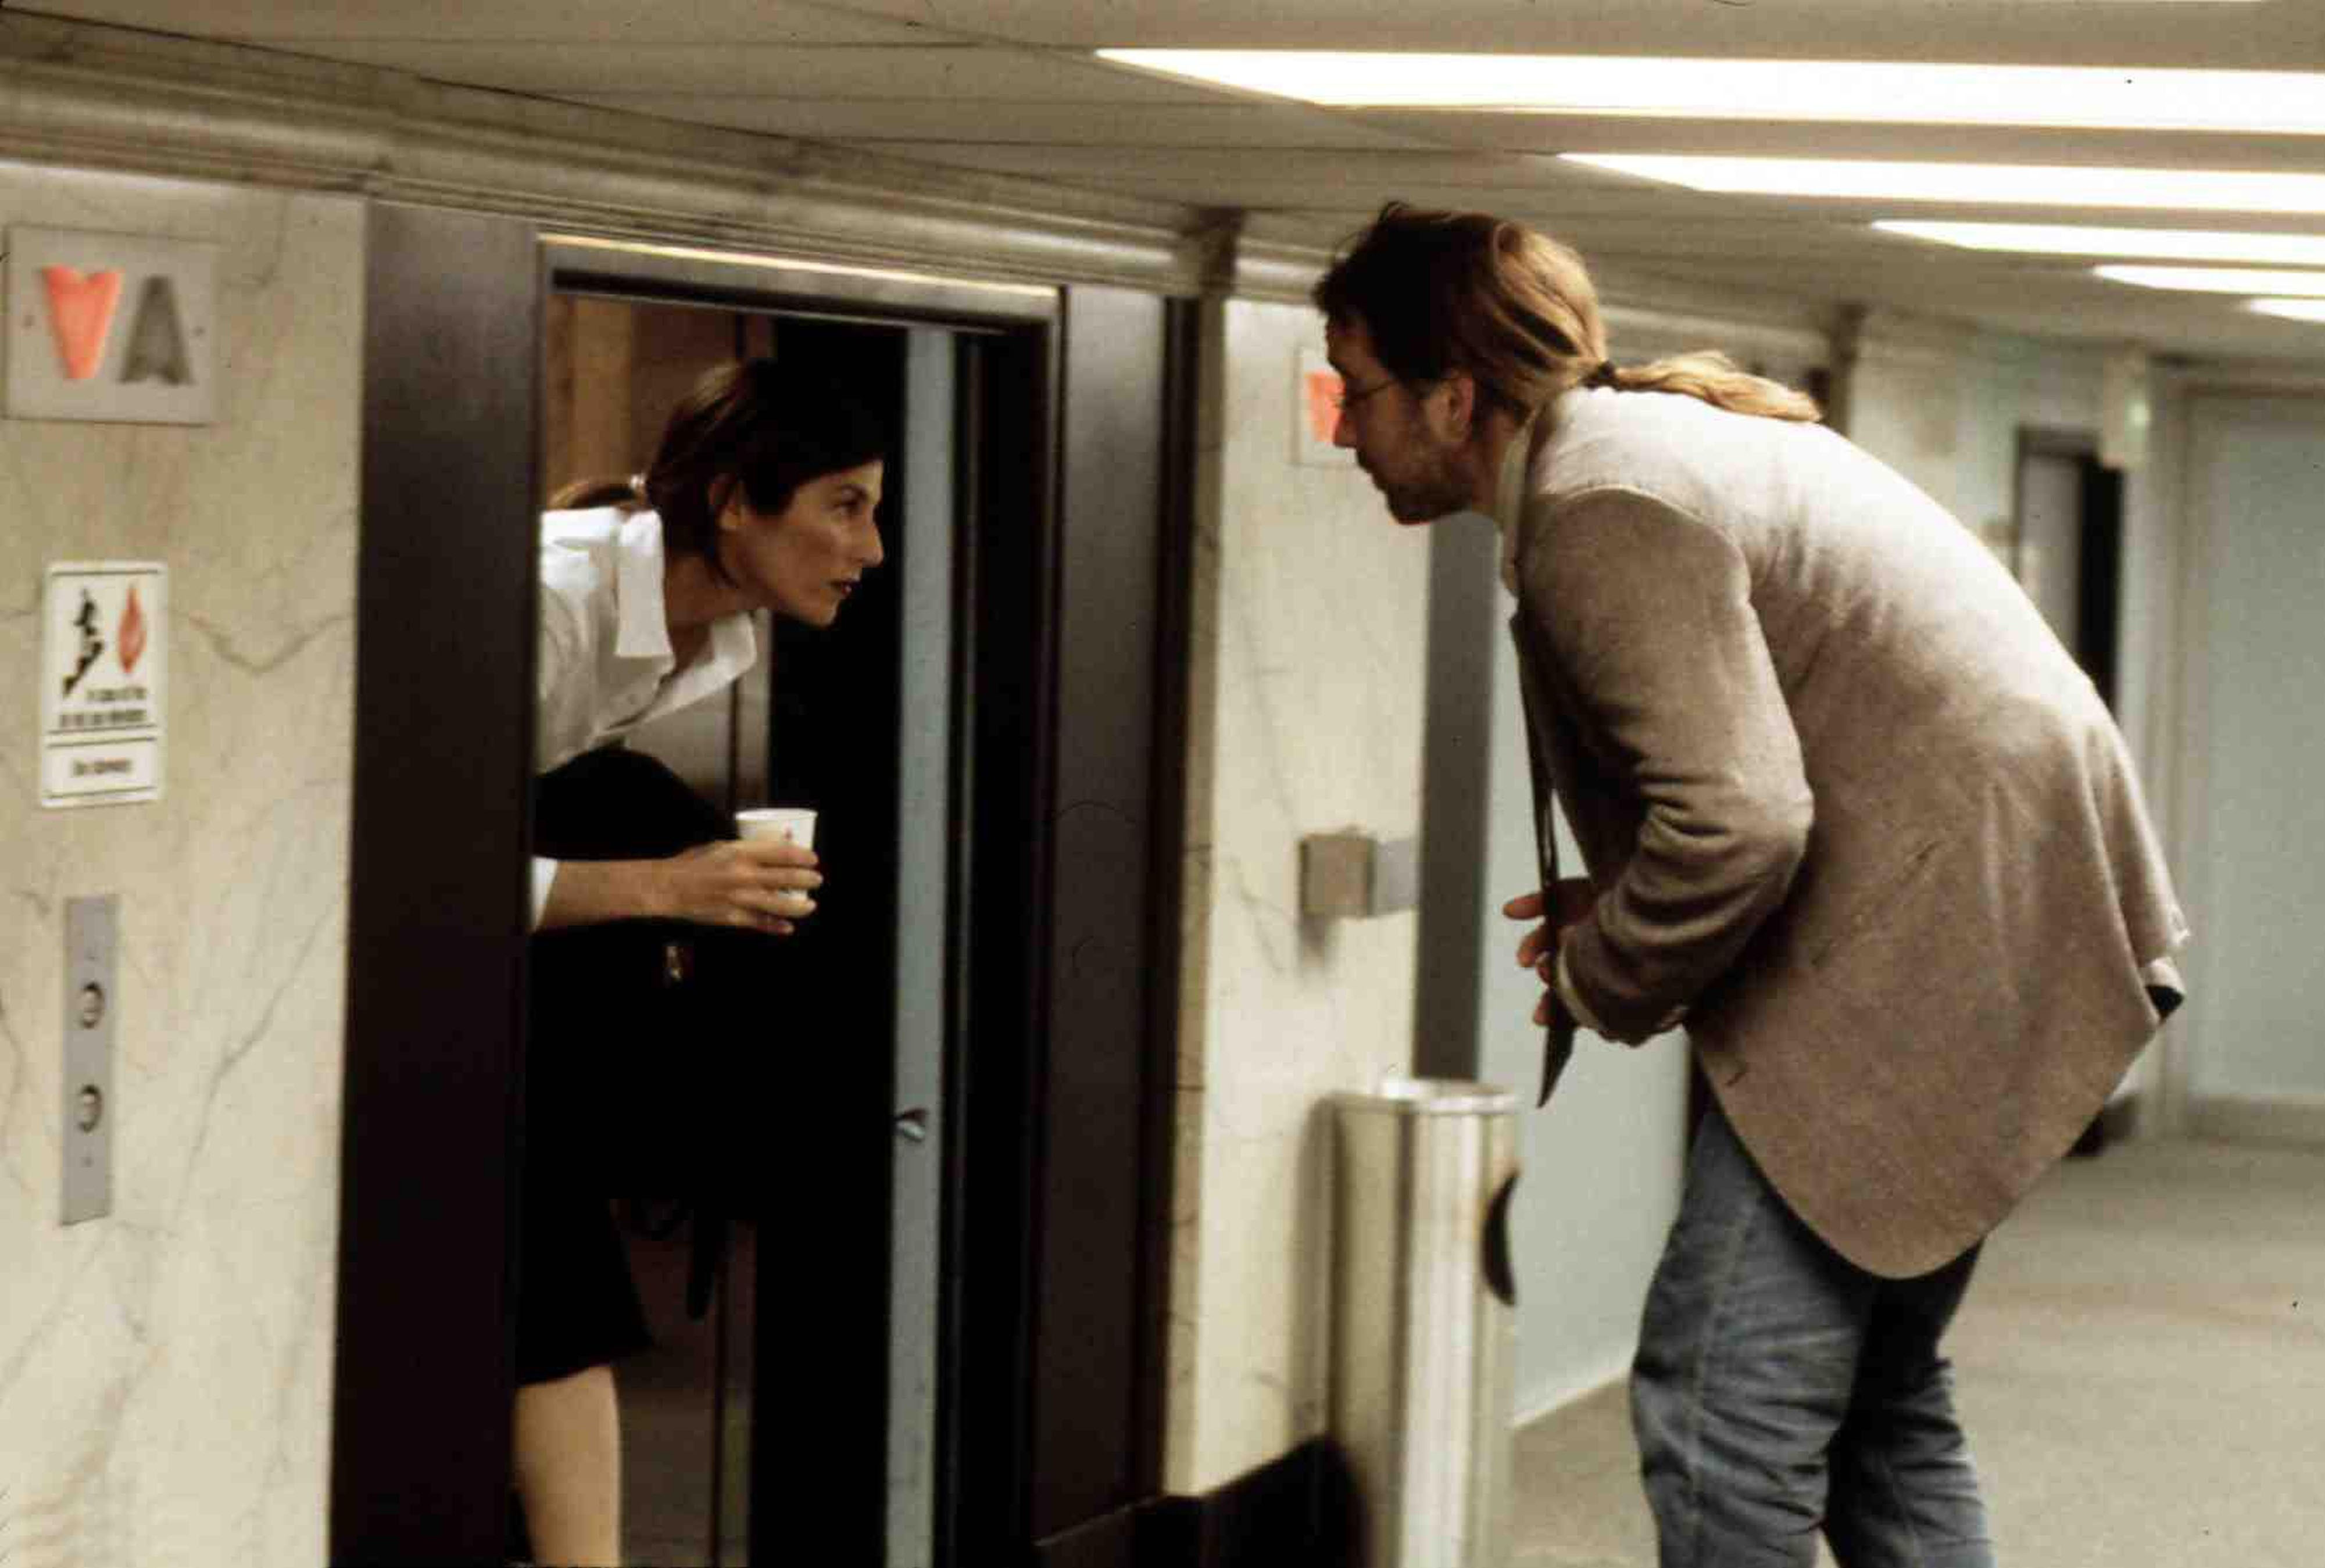 (L to R) Catherine Keener as Maxine and John Cusack as Craig outside of an elevator in a too-short hallway that forces them to crouch in Being John Malkovich